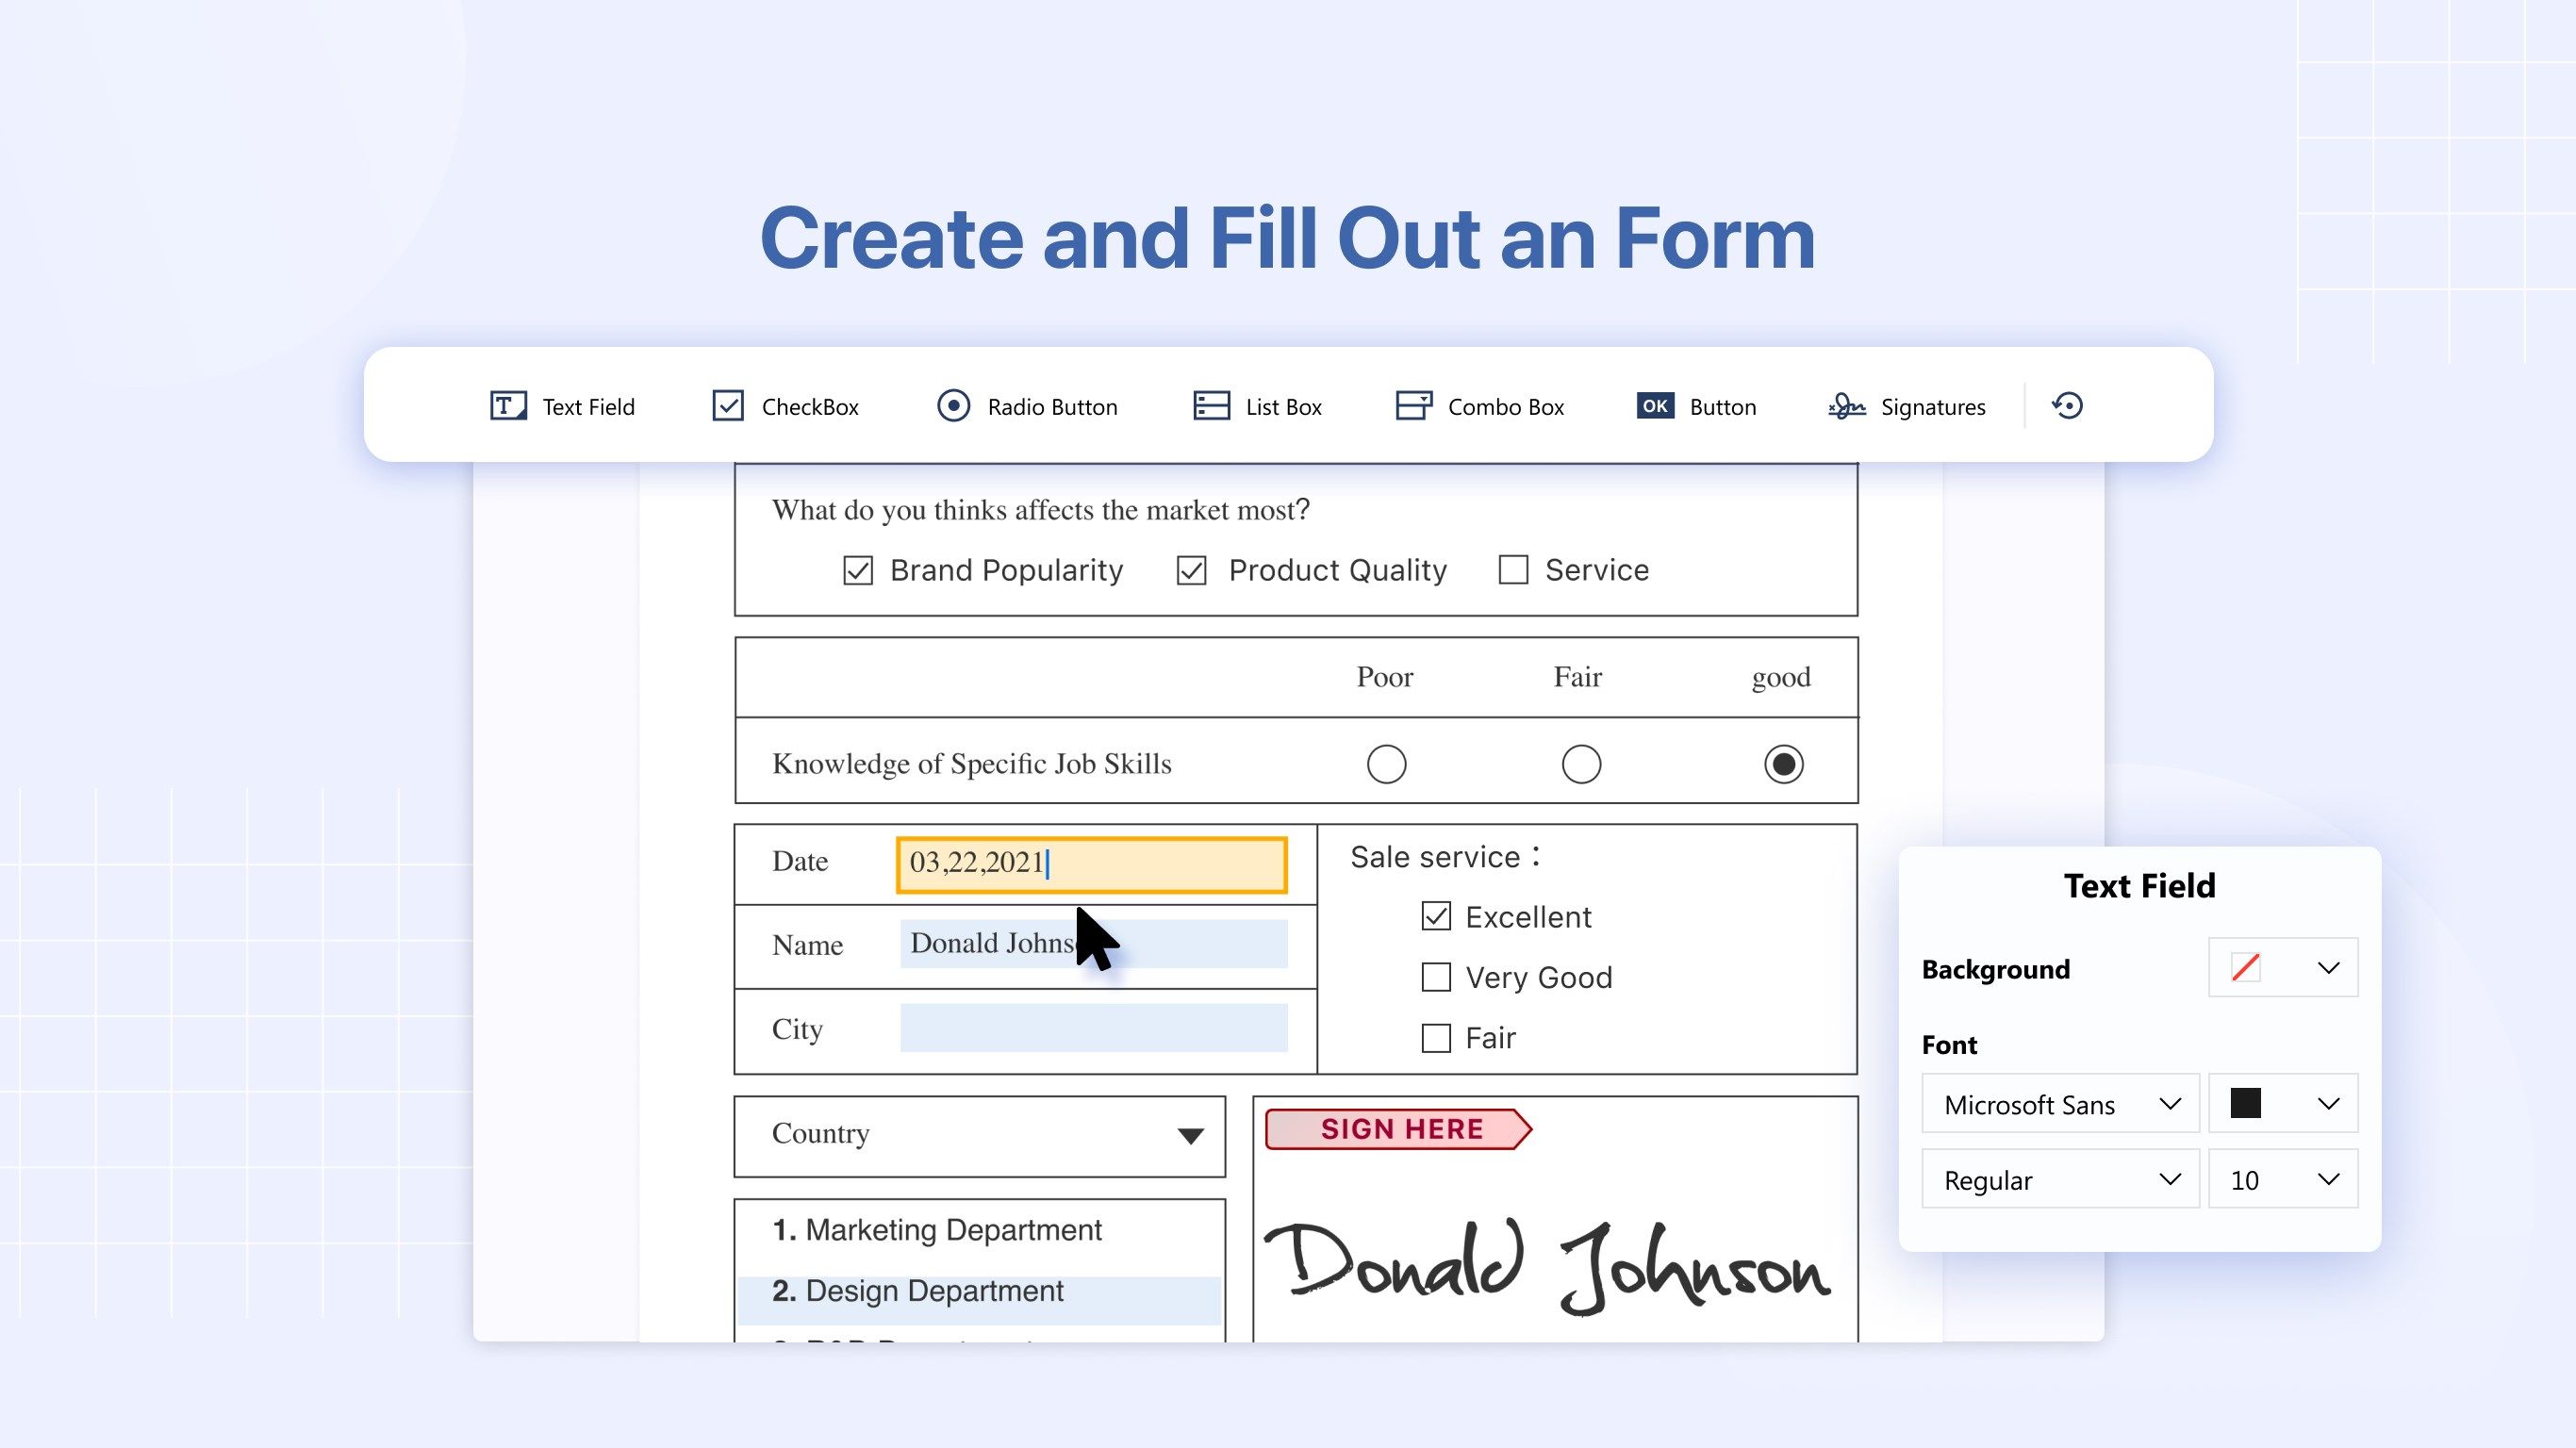 Create and Fill Out an Form